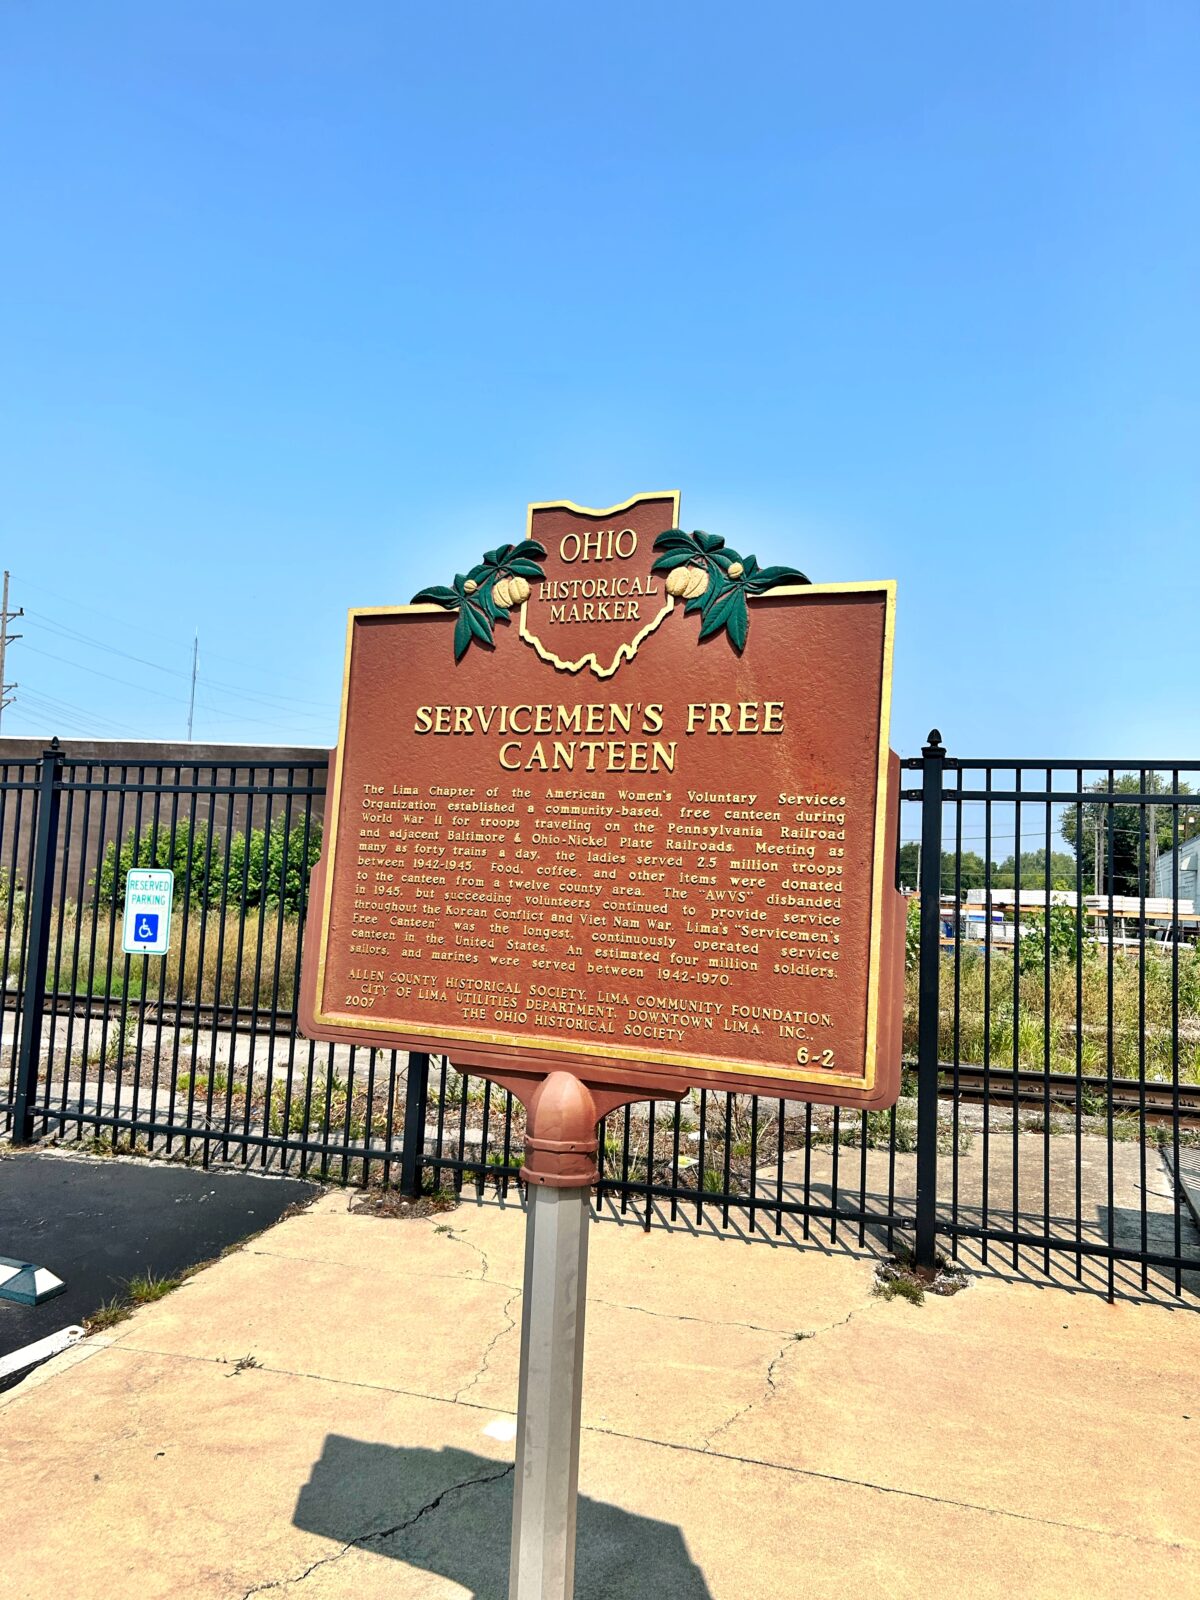 Remarkable Ohio … Ohio Historical Marker #6-2 Servicemen’s Free Canteen